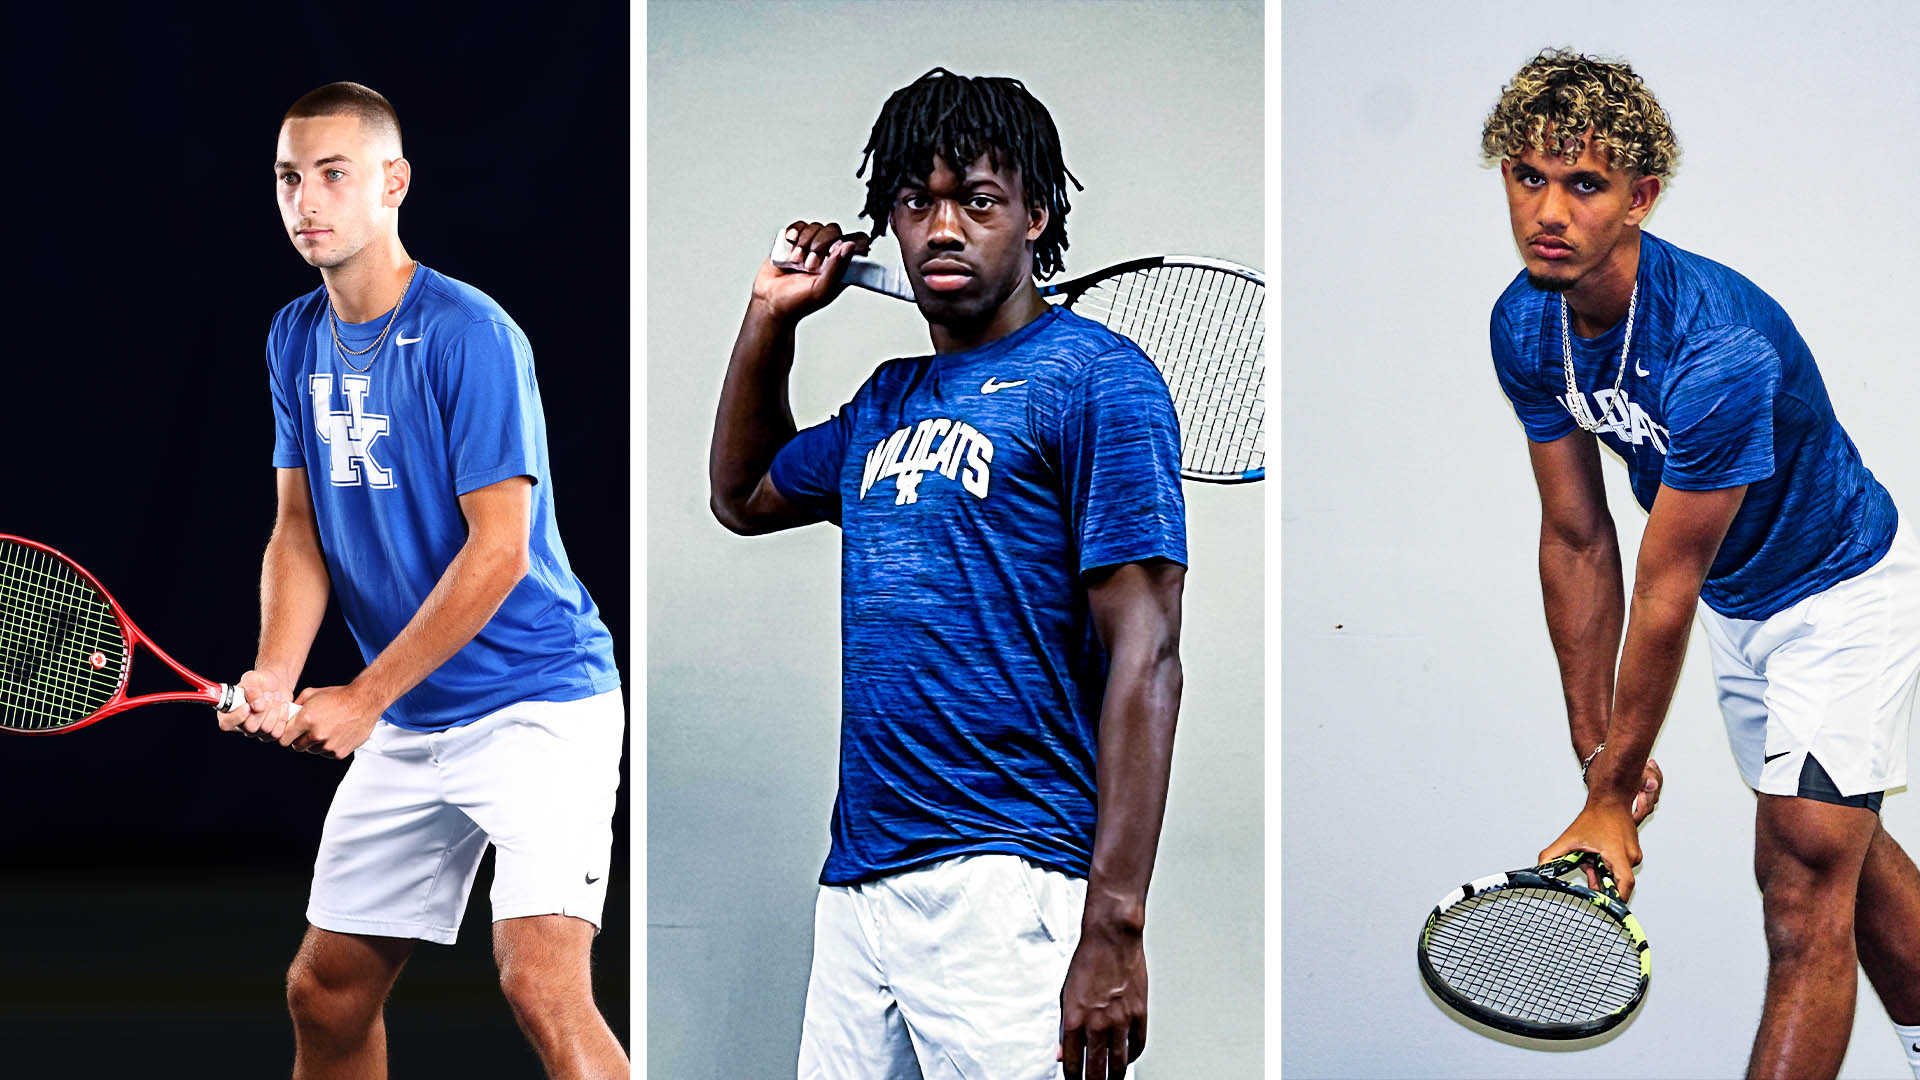 Kentucky Trio to Compete at ITA All-American Championships